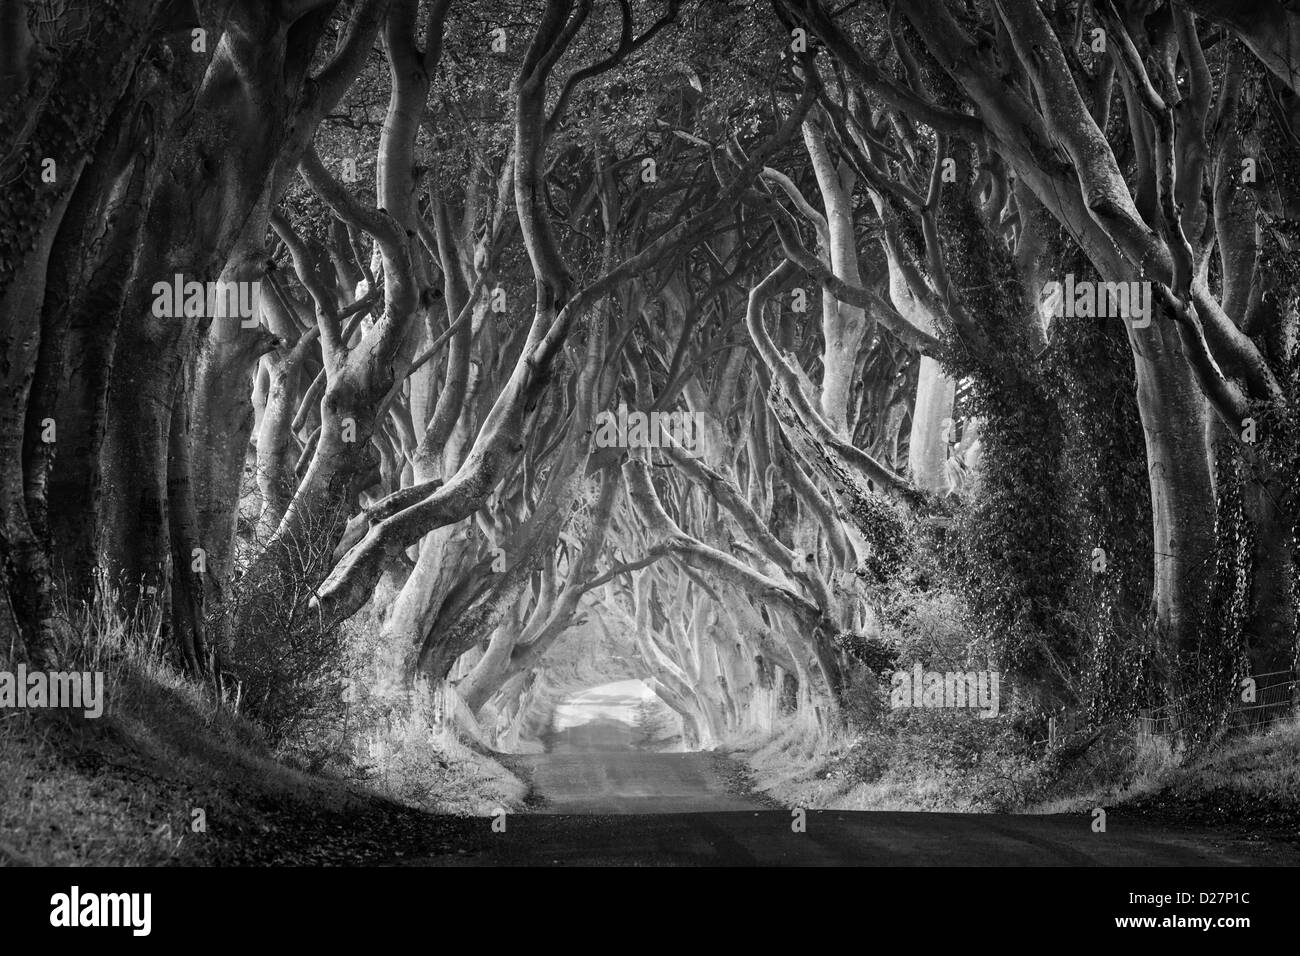 Black and white view of the famous Dark Hedges landscape location from Northern Ireland Stock Photo